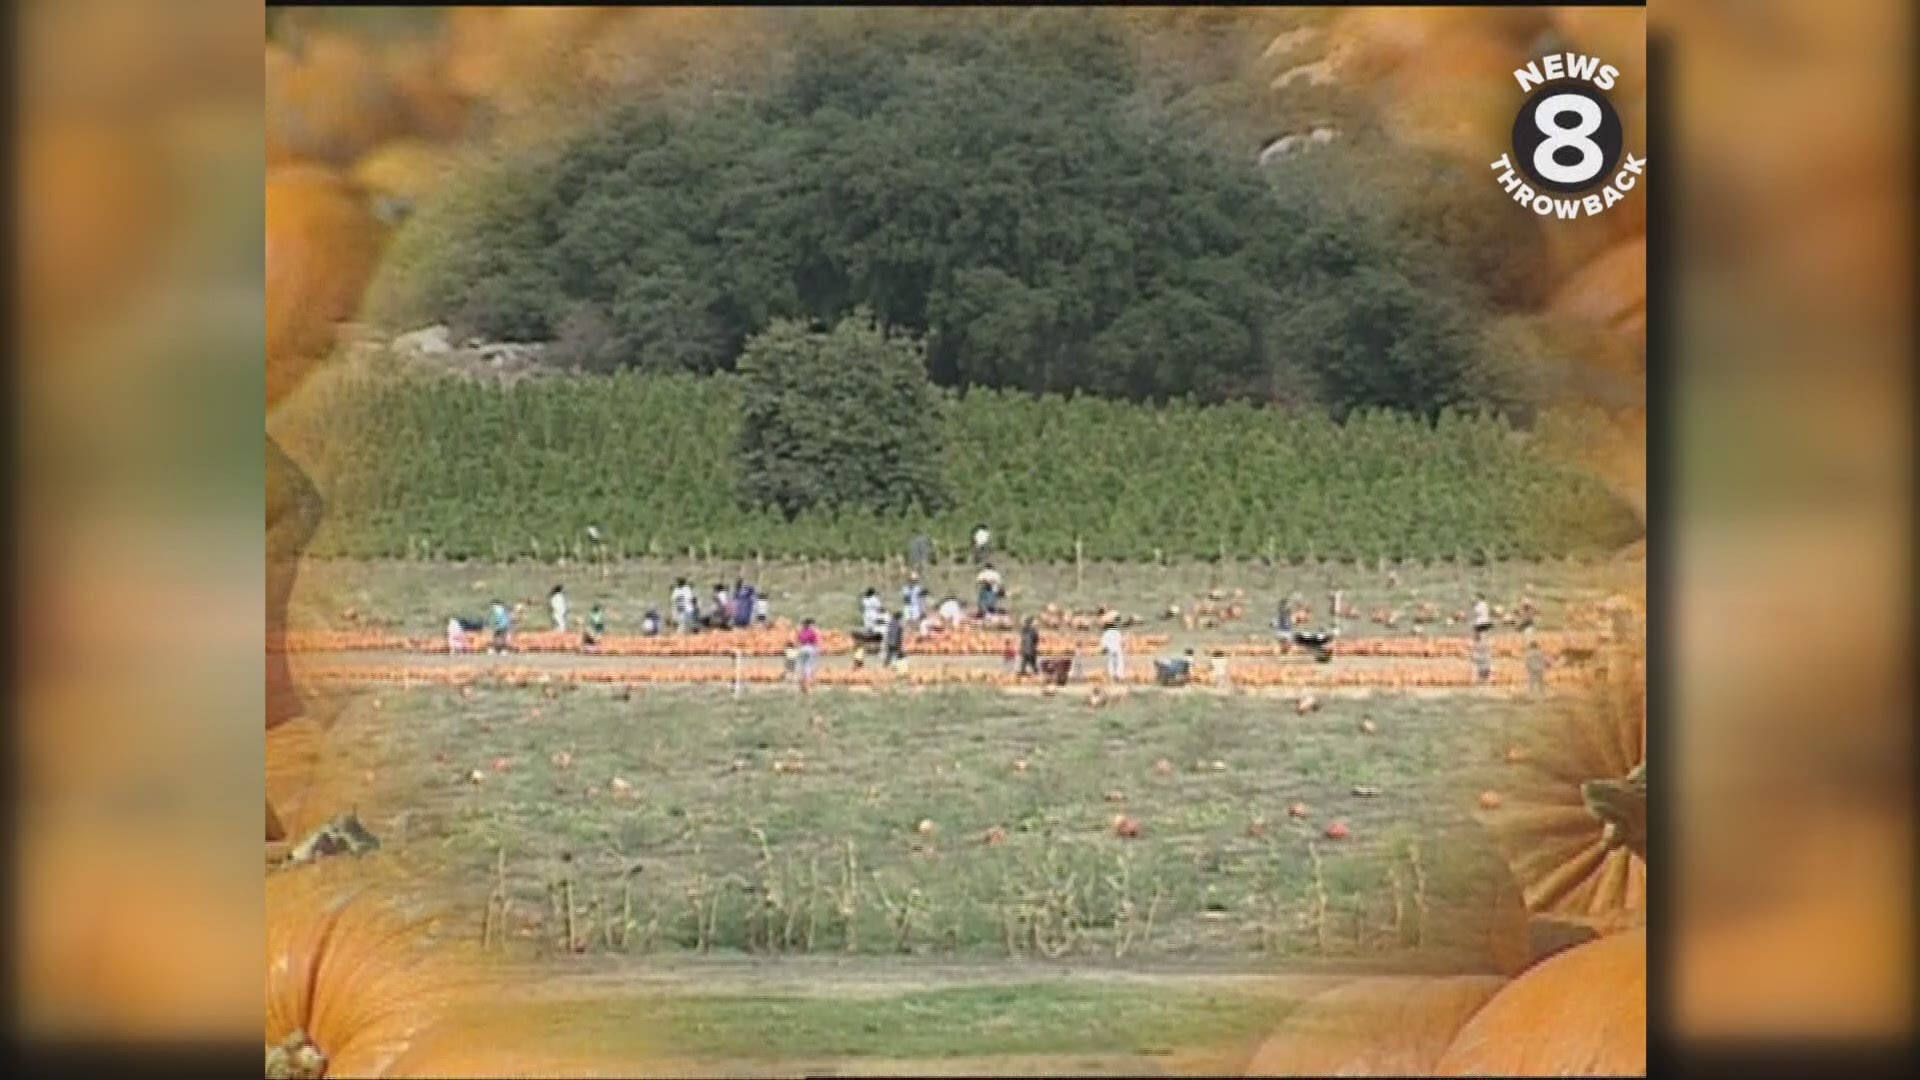 A favorite fall outing in San Diego is a trip to Bate’s Nut Farm in Valley Center to visit their annual pumpkin patch.